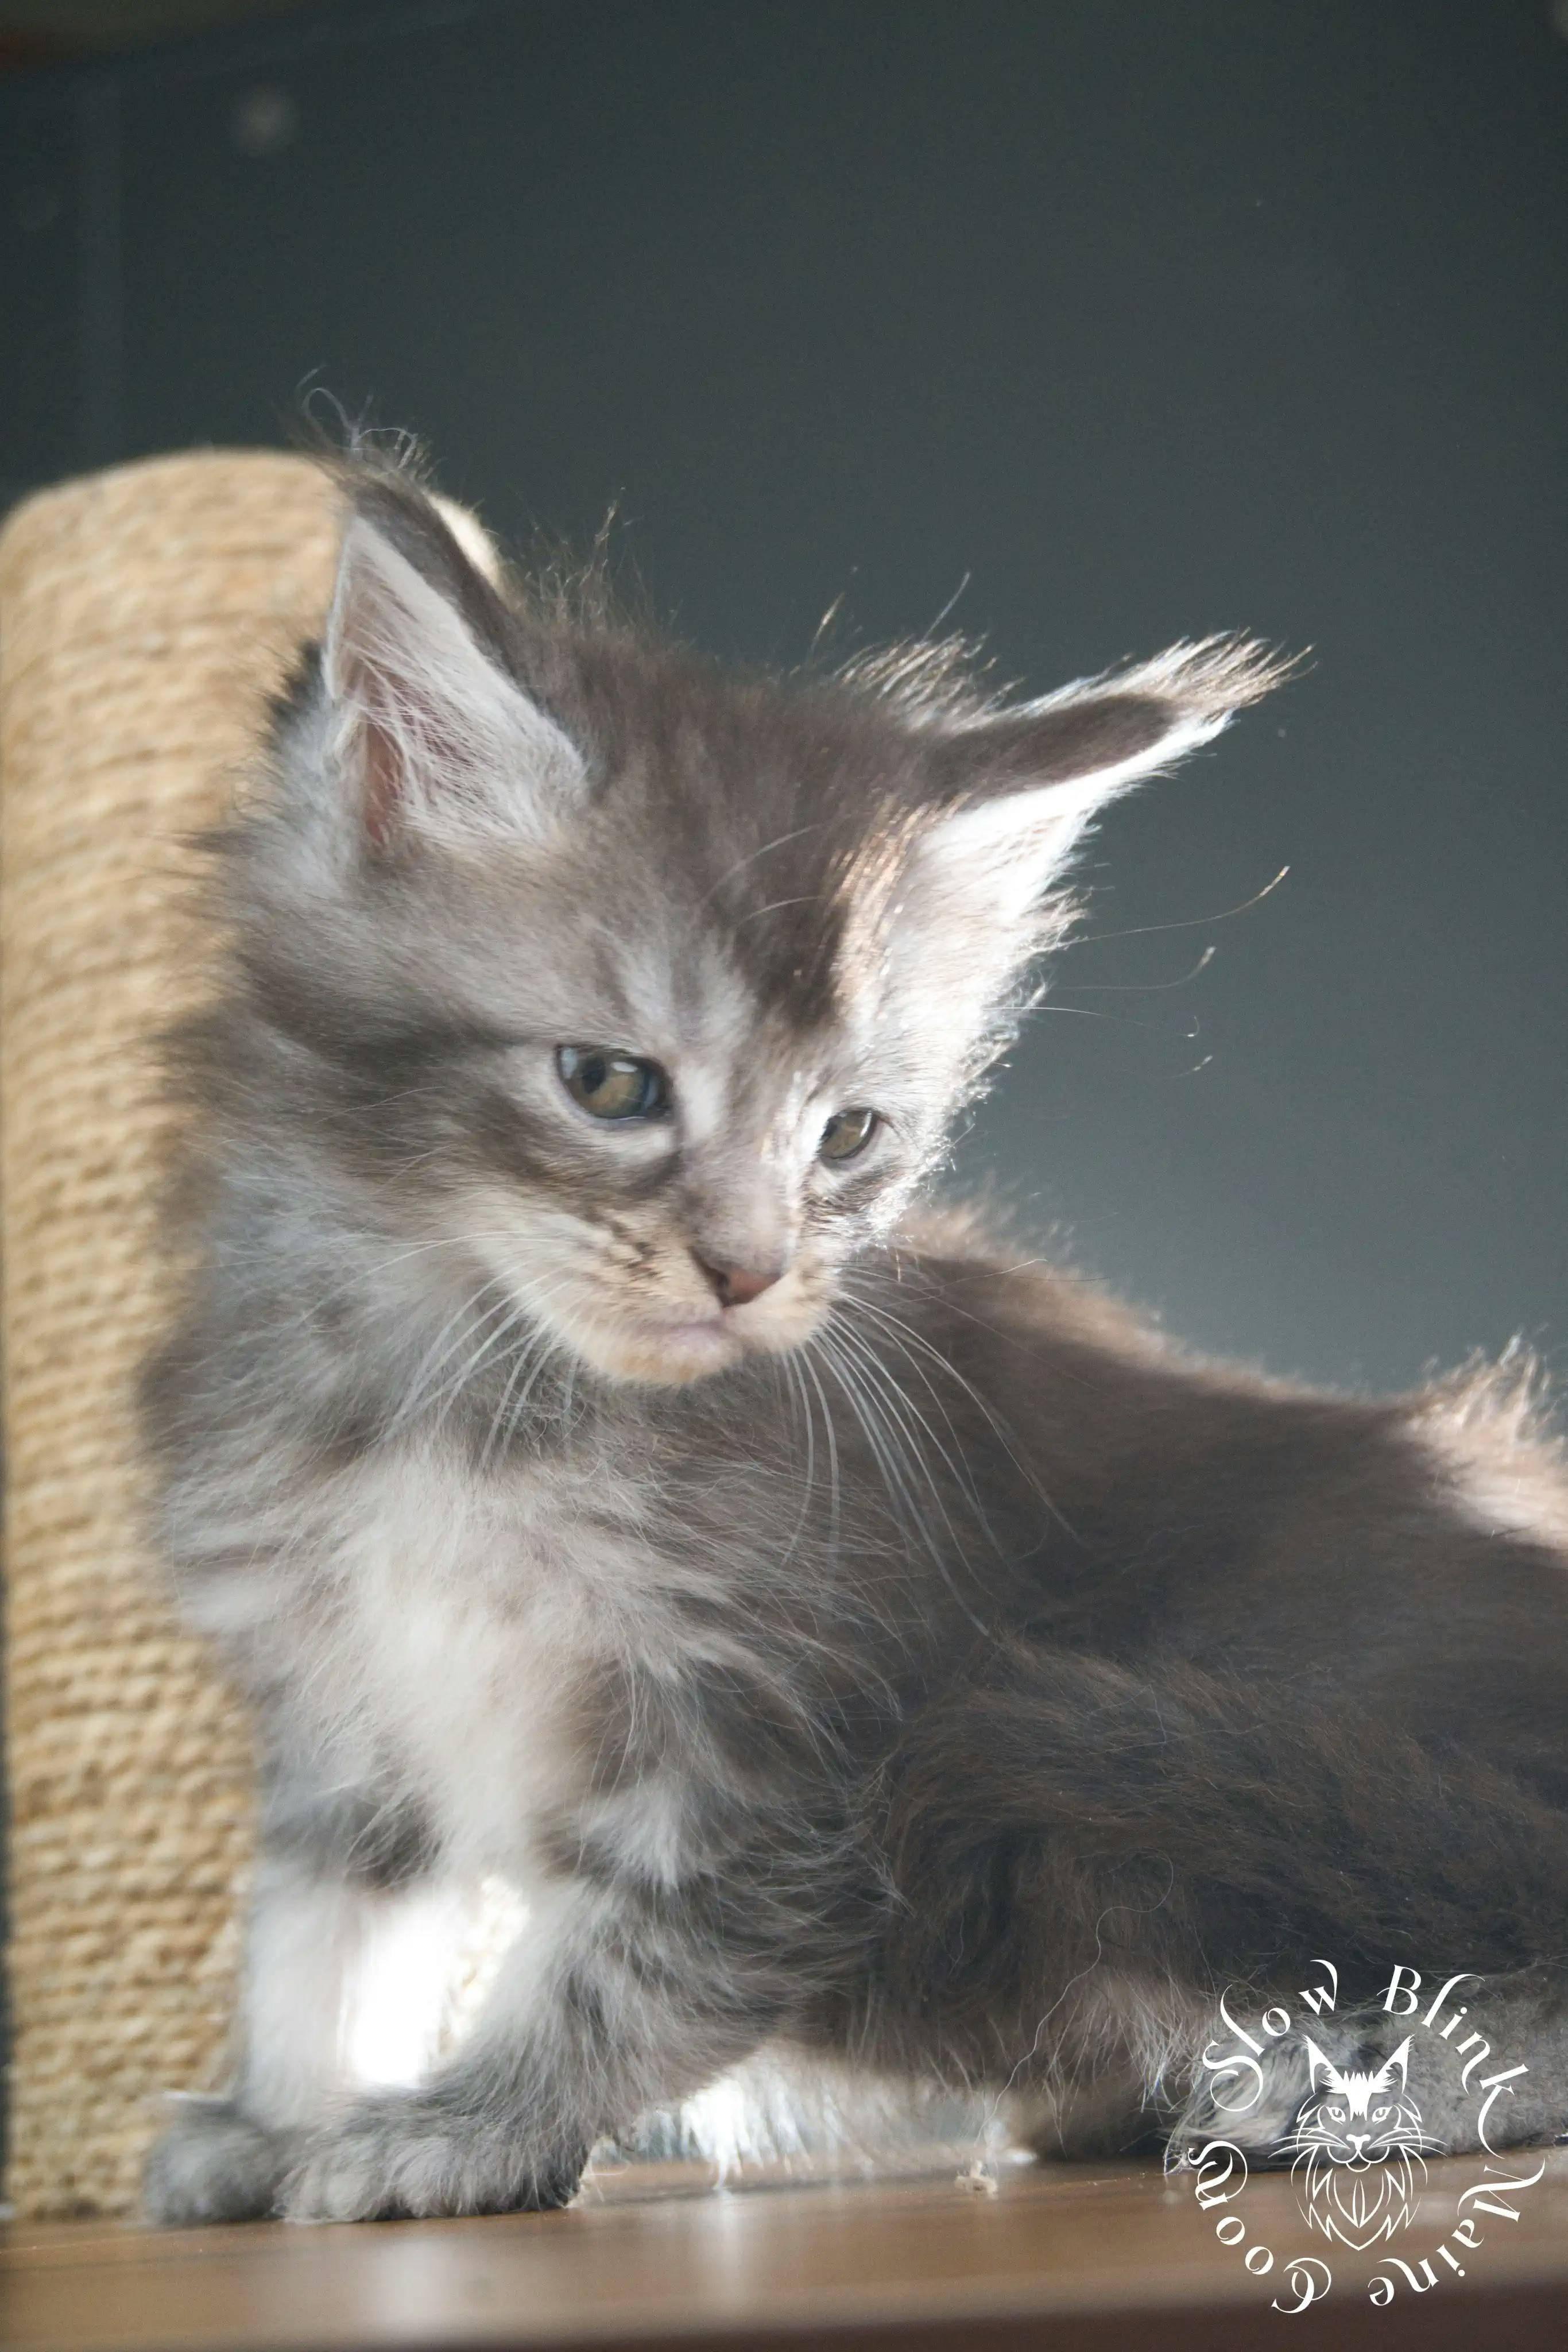 Blue Silver Tabby Maine Coon Kittens > blue silver tabby maine coon kitten | slowblinkmainecoons | 04